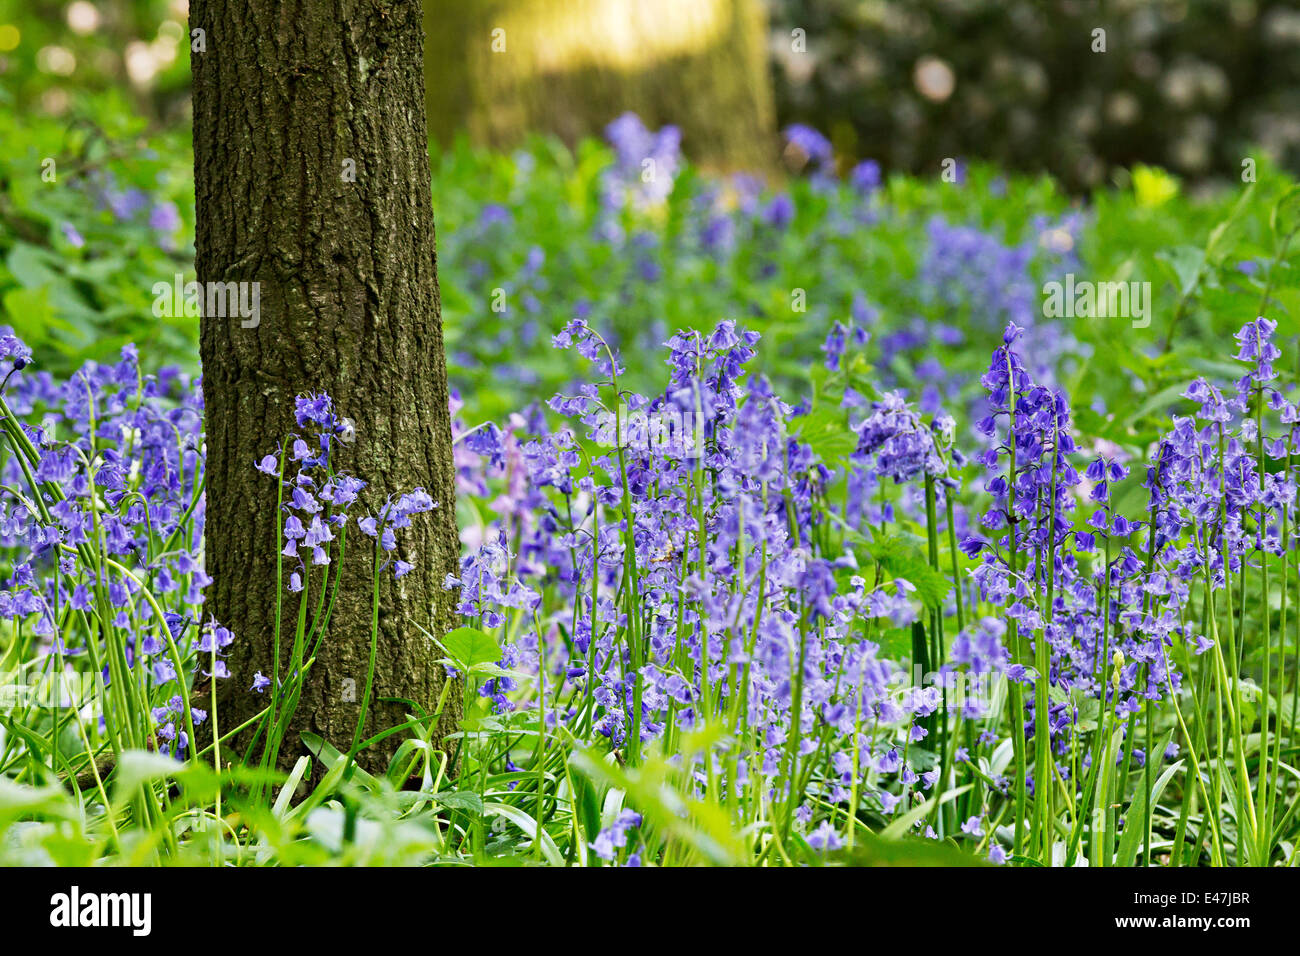 Bluebell wood, bluebells in lush green woodland foliage on a sunny spring morning. Stock Photo